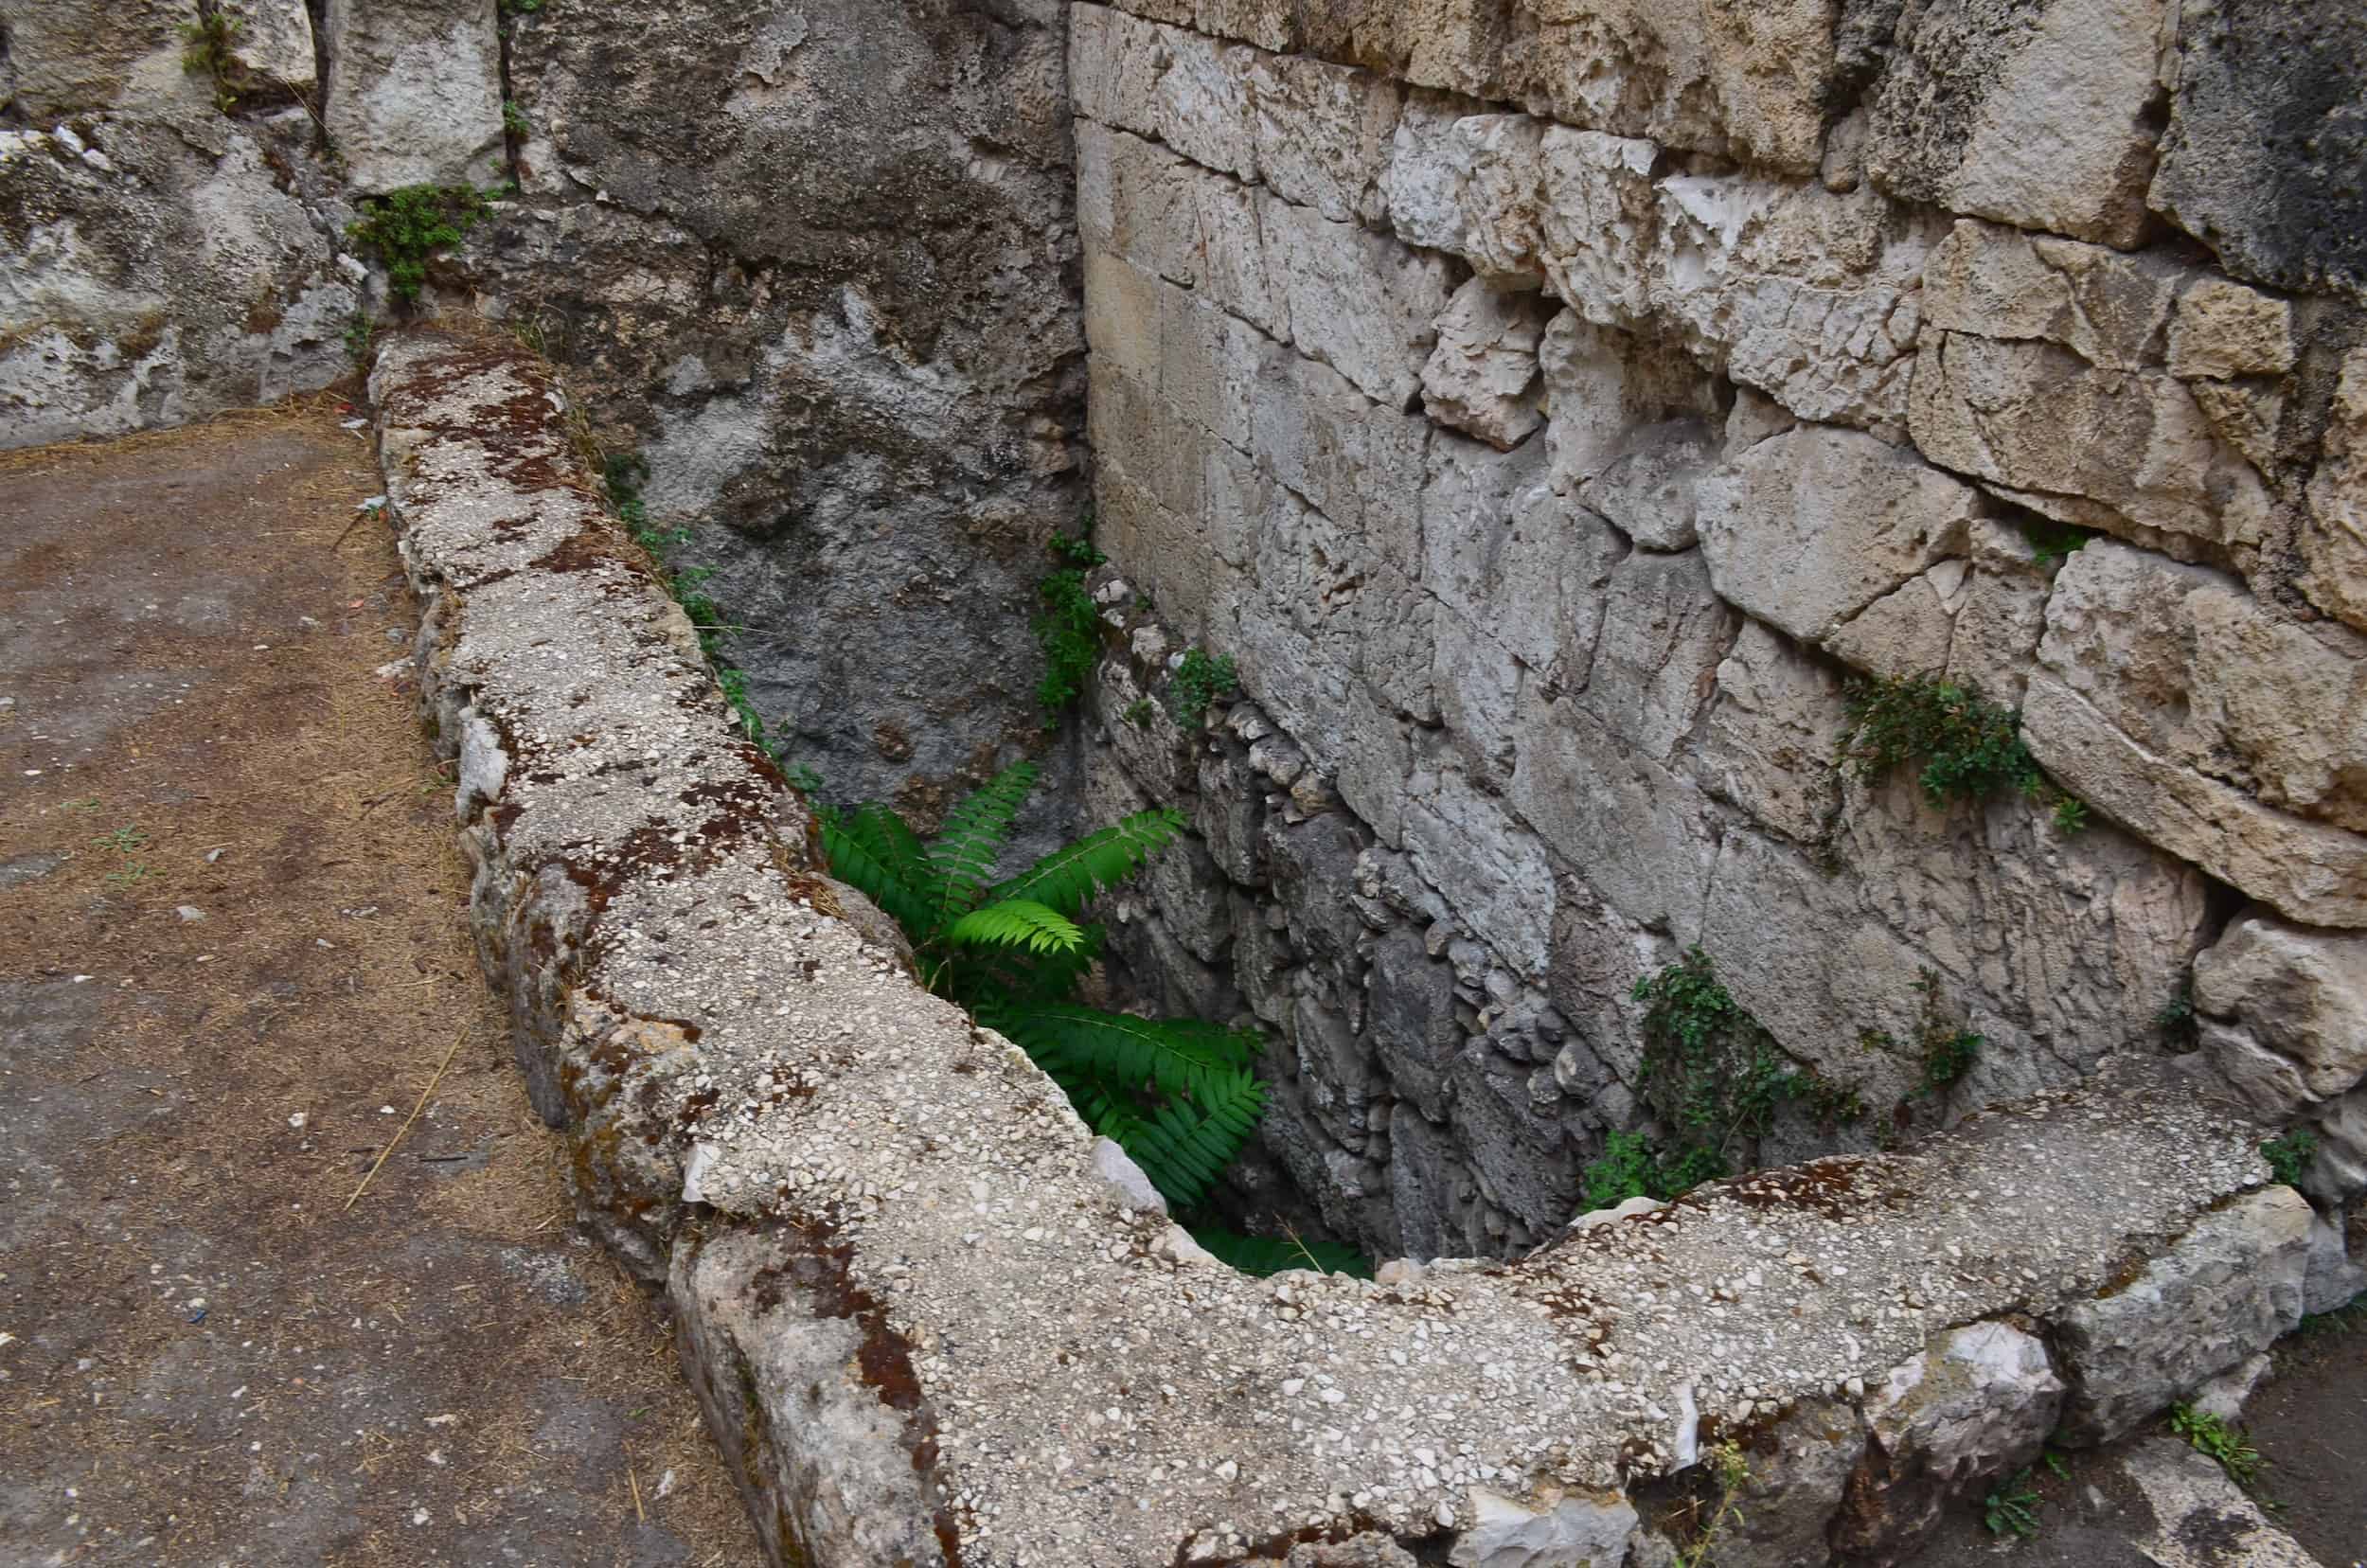 Part of the northern pool at the Pools of Bethesda